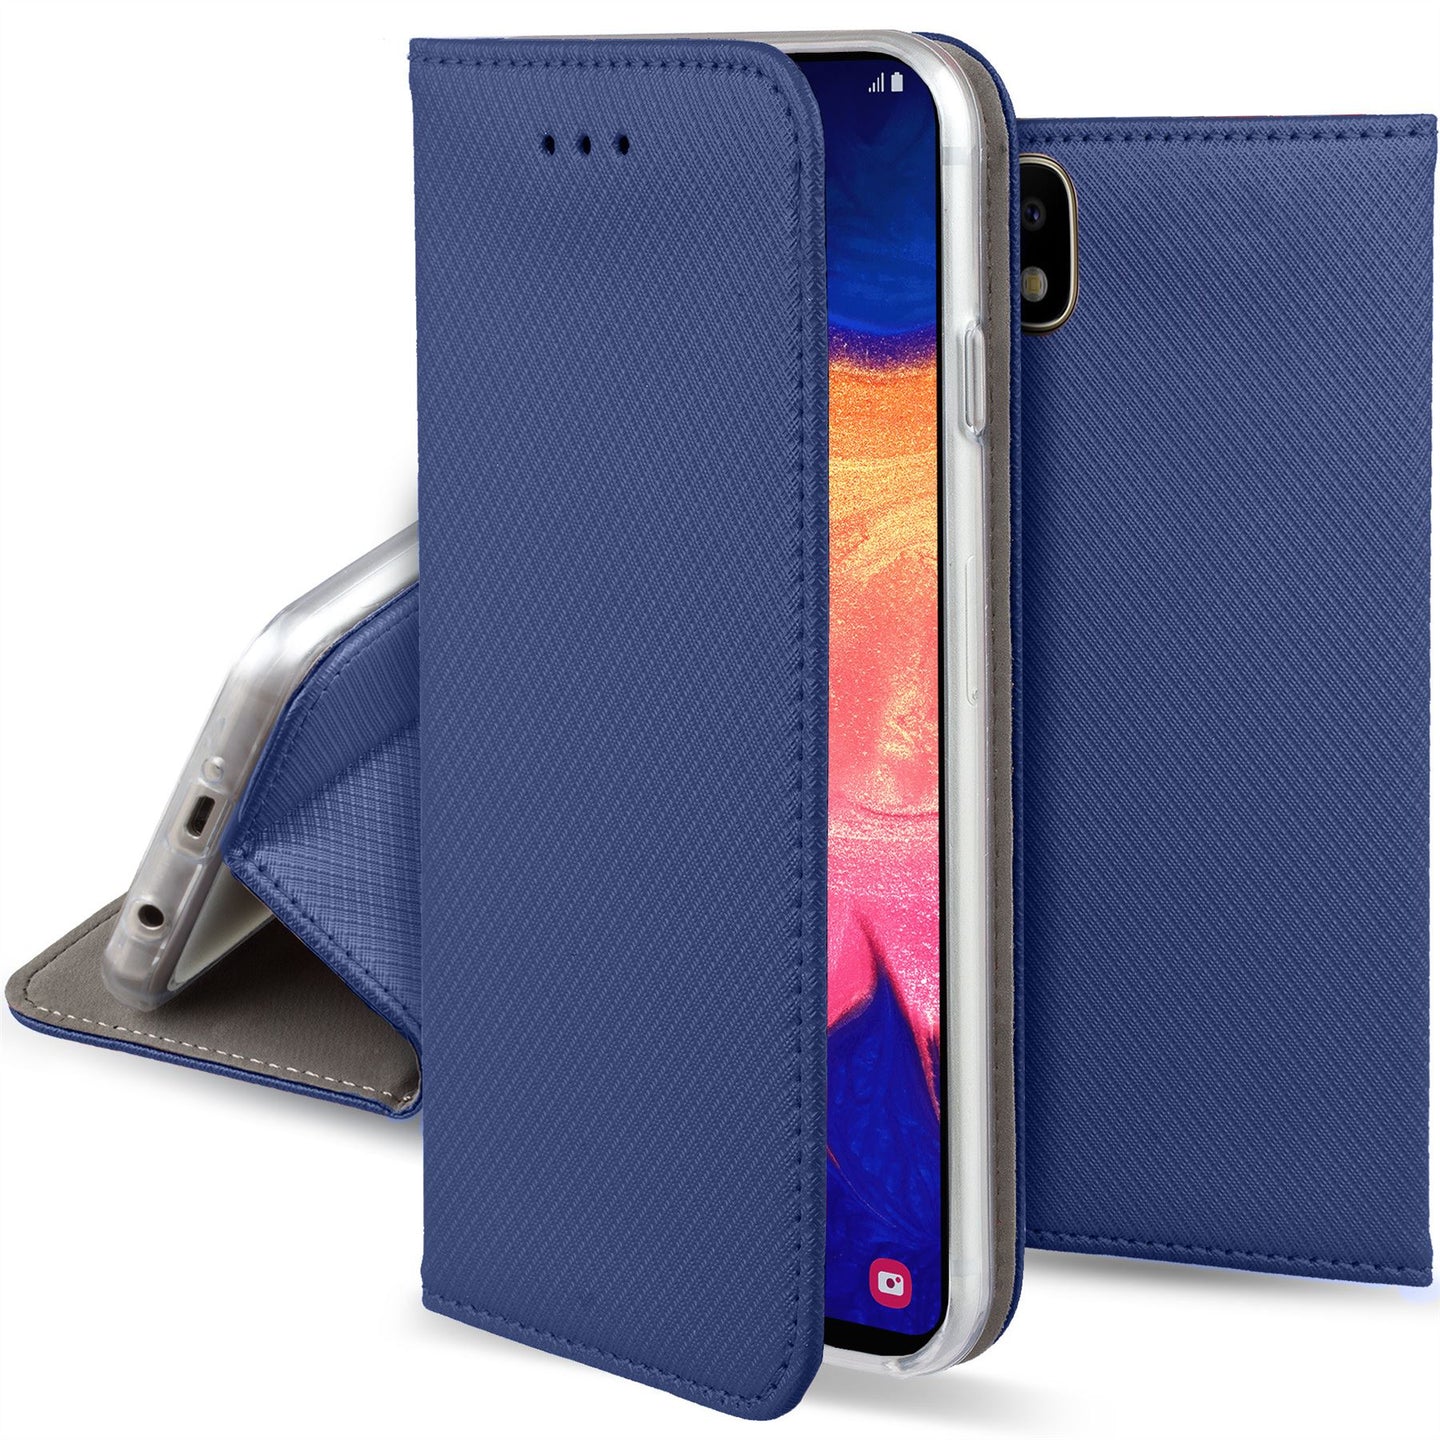 Moozy Case Flip Cover for Samsung A10, Dark Blue - Smart Magnetic Flip Case with Card Holder and Stand